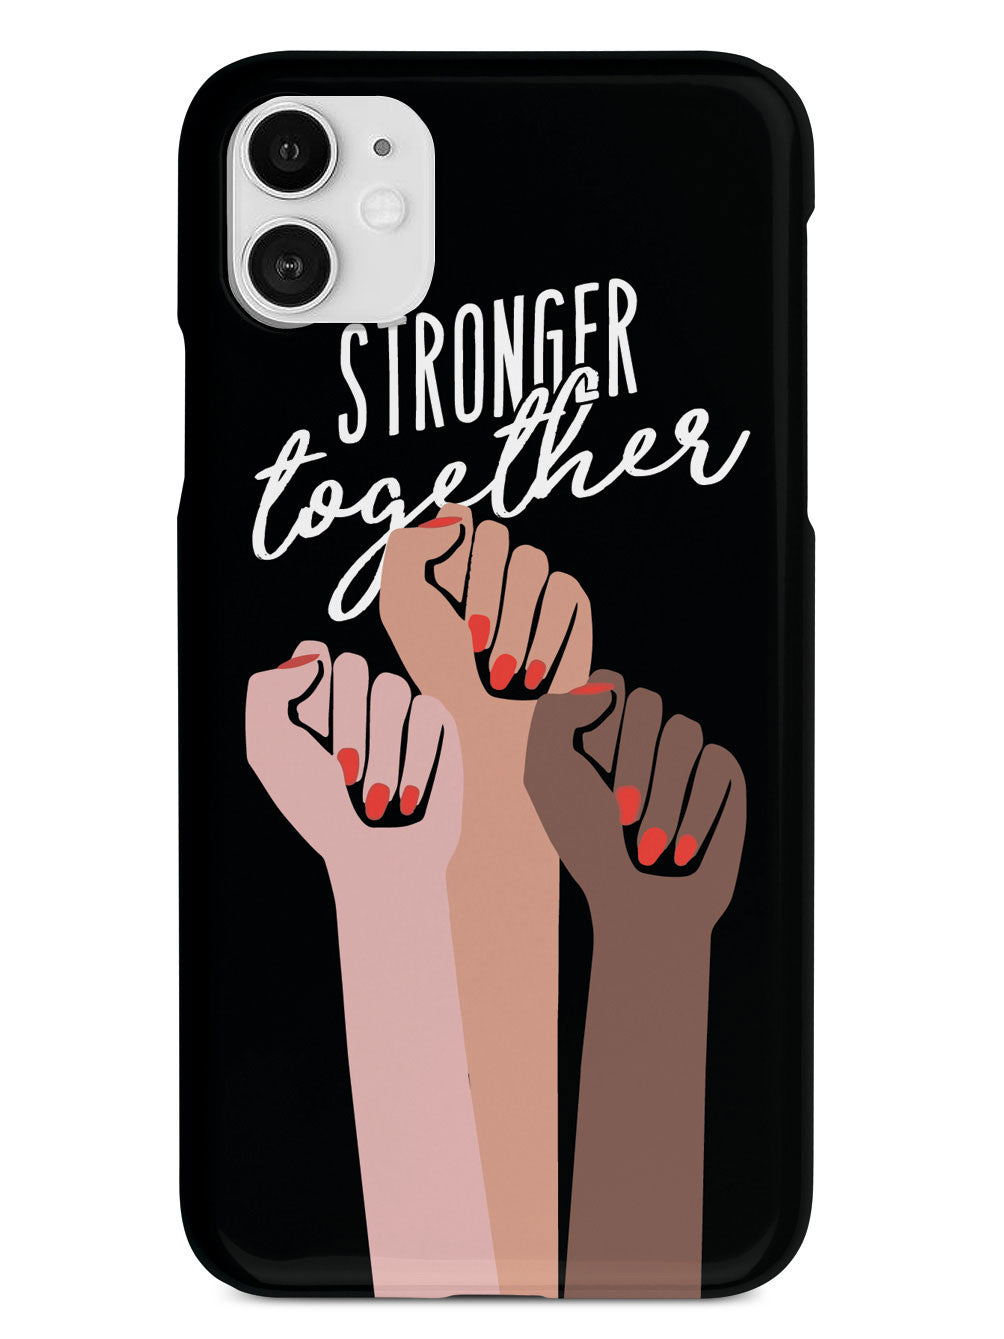 Stronger Together - Women's March Solidarity - Black Case